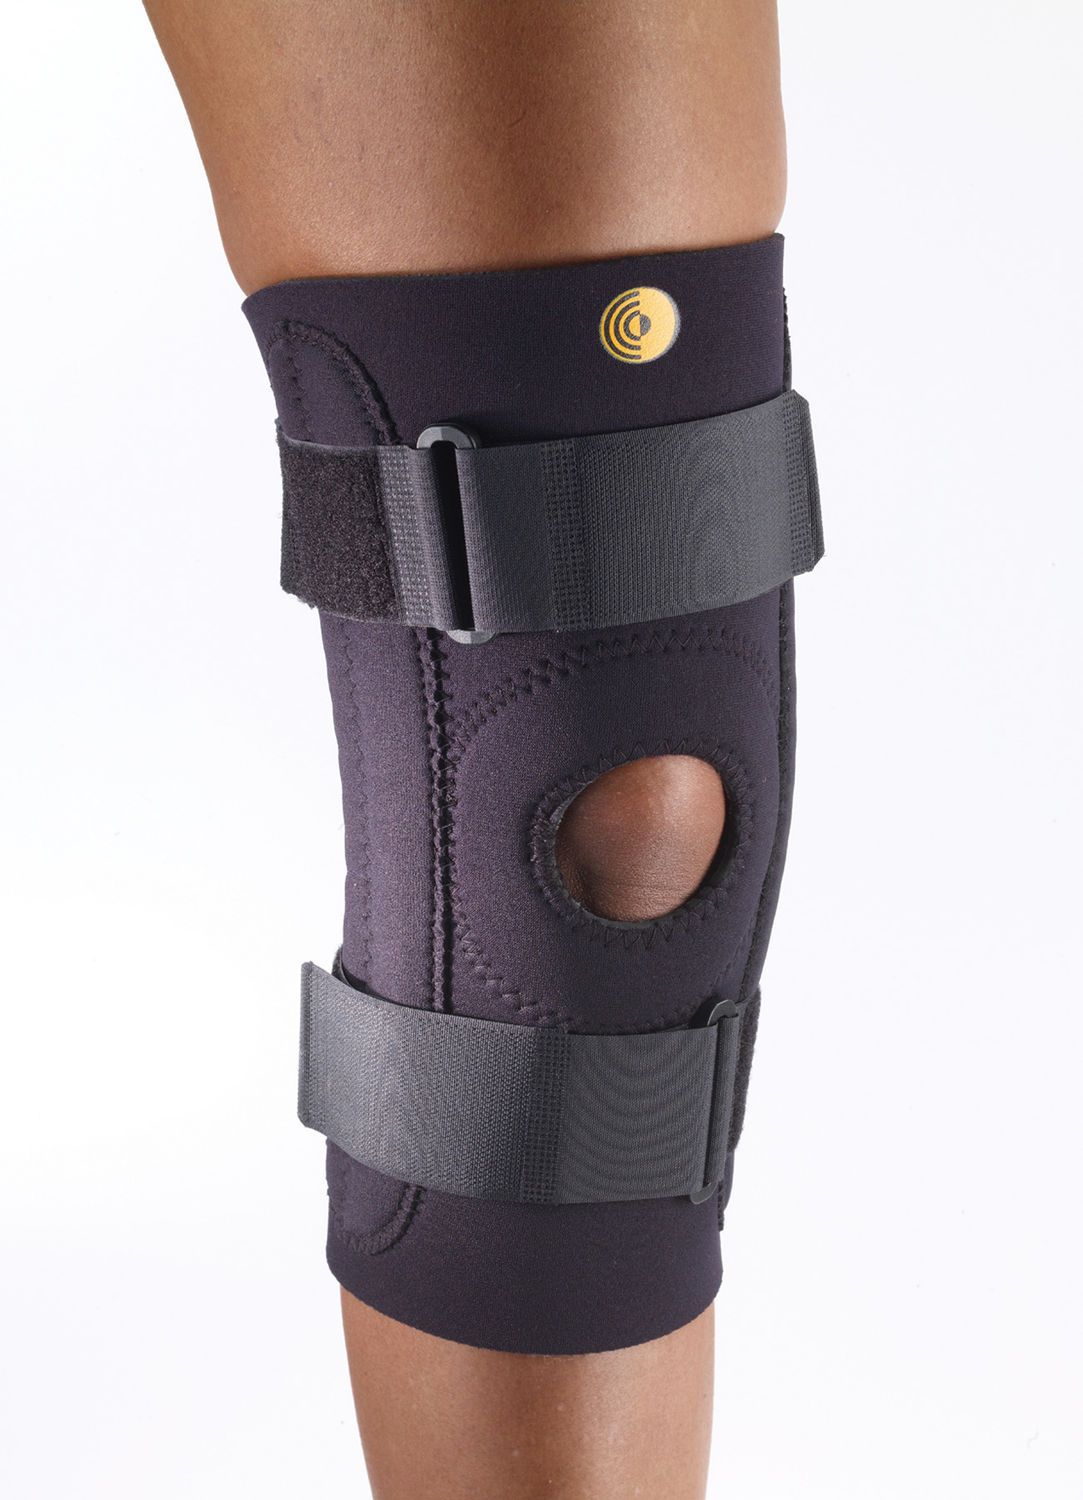 Knee orthosis (orthopedic immobilization) / open knee / with flexible stays / with patellar buttress 88-5025 Corflex